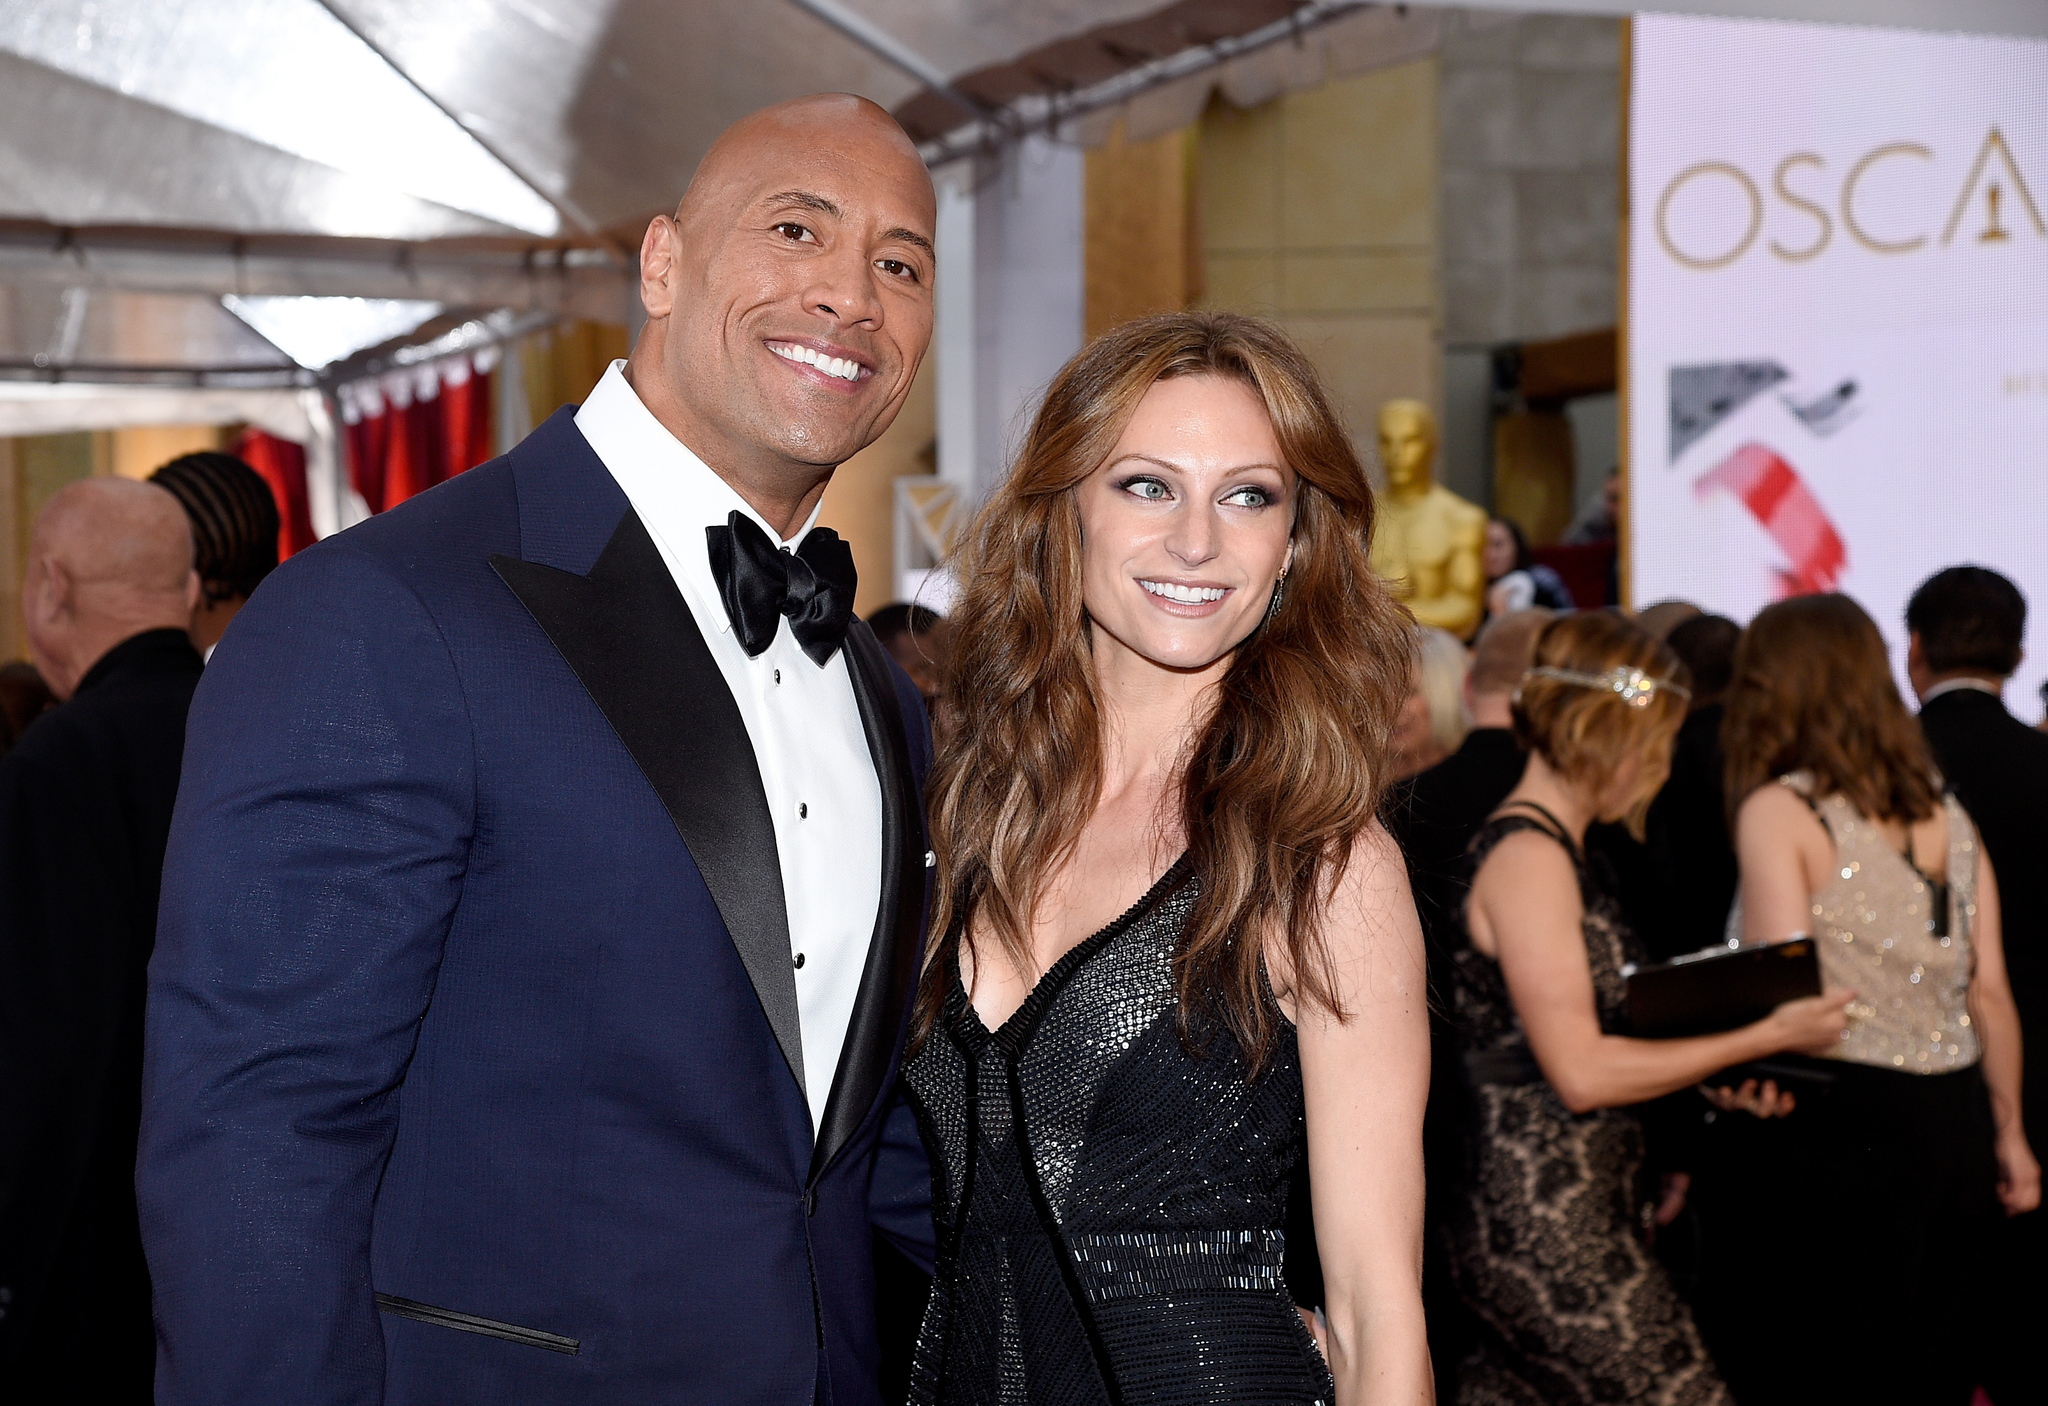 Dwayne Johnson and Lauren Hashian at event of The Oscars (2015)